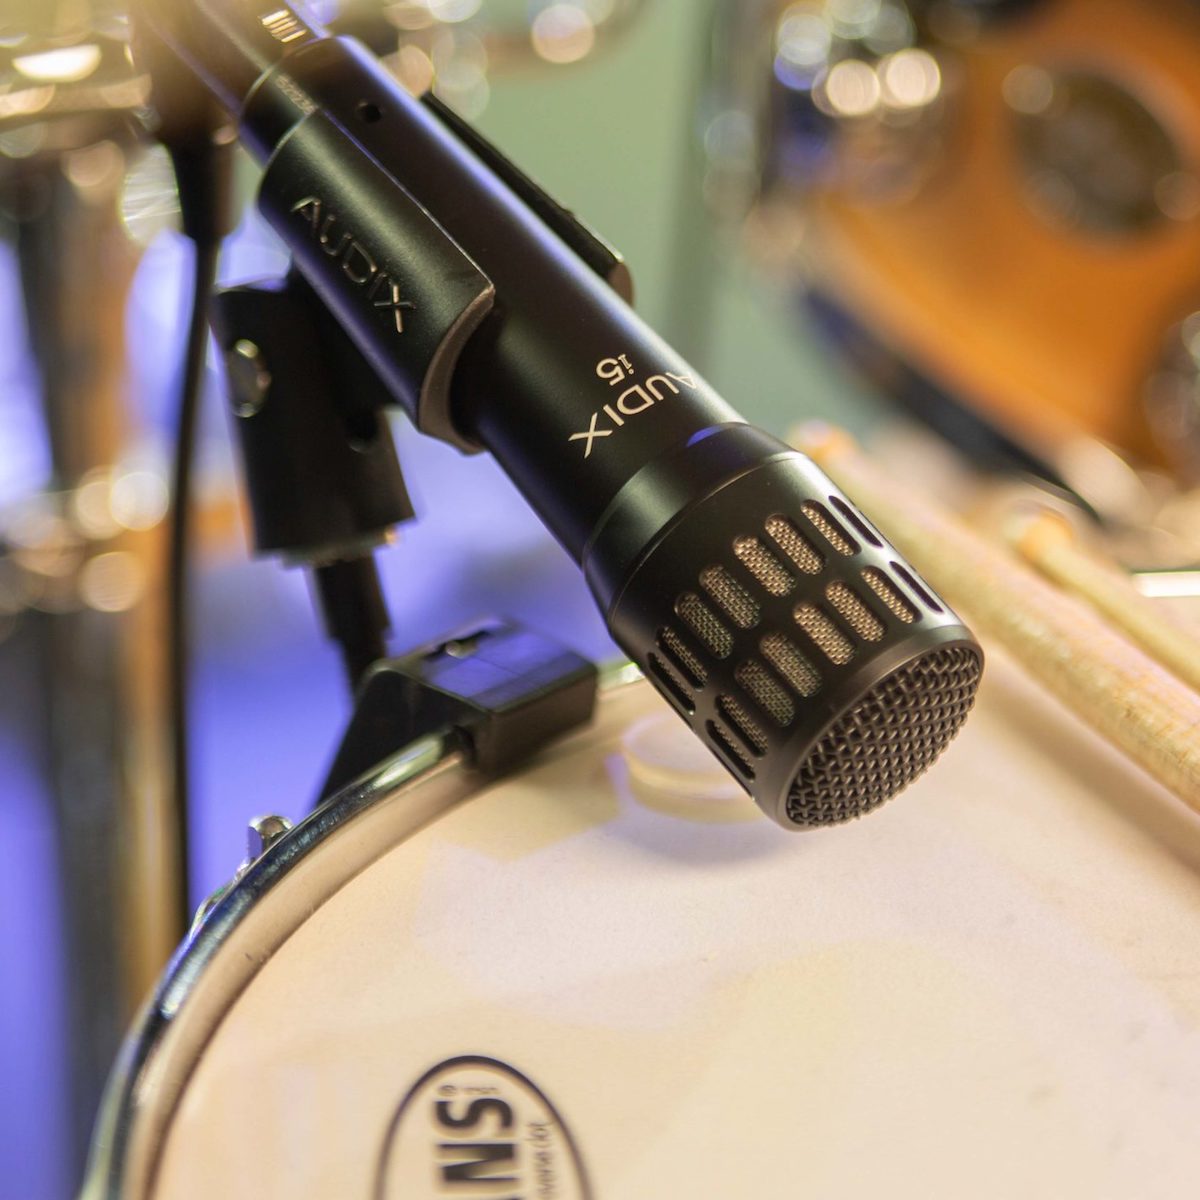 Audix i5 All-Purpose Professional Dynamic Instrument Microphone mounted on a drum